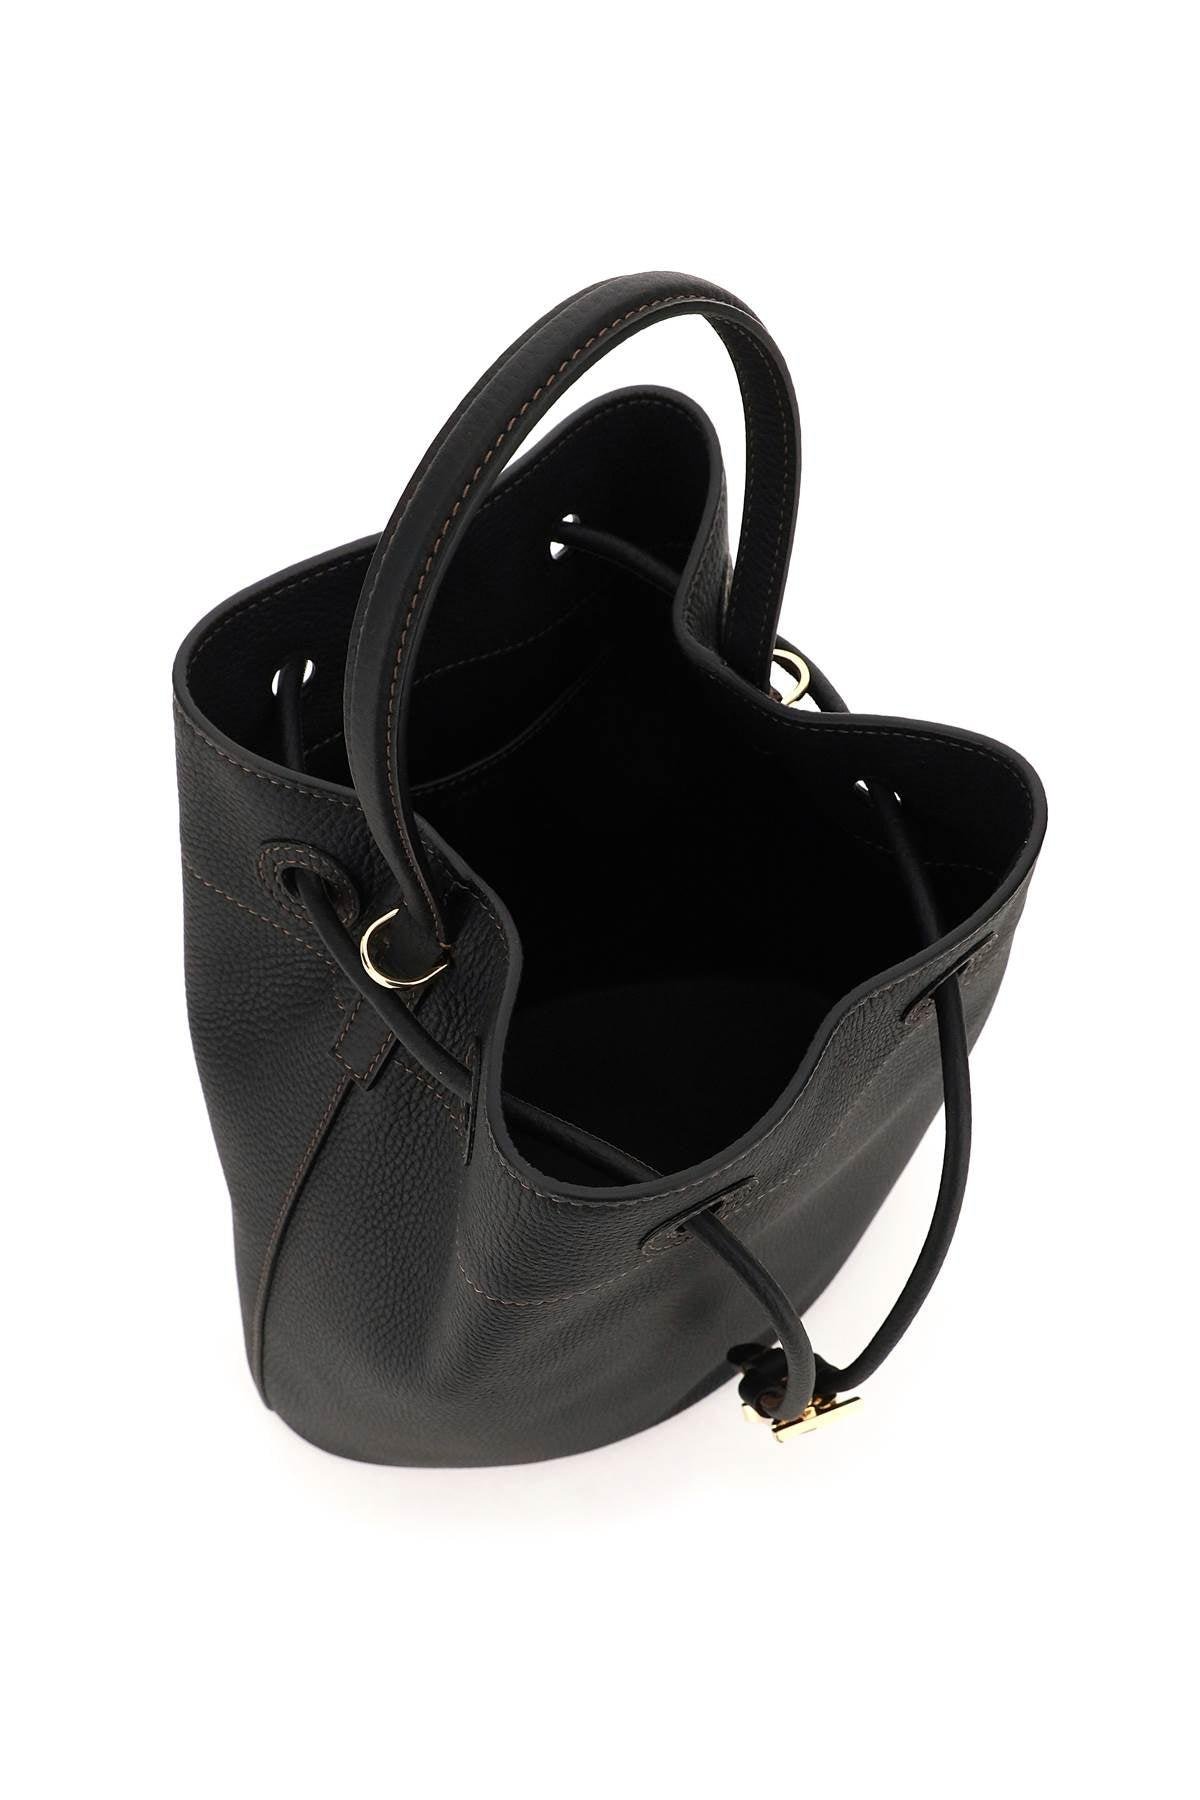 Burberry Grainy Leather Bucket Bag in Black | Lyst